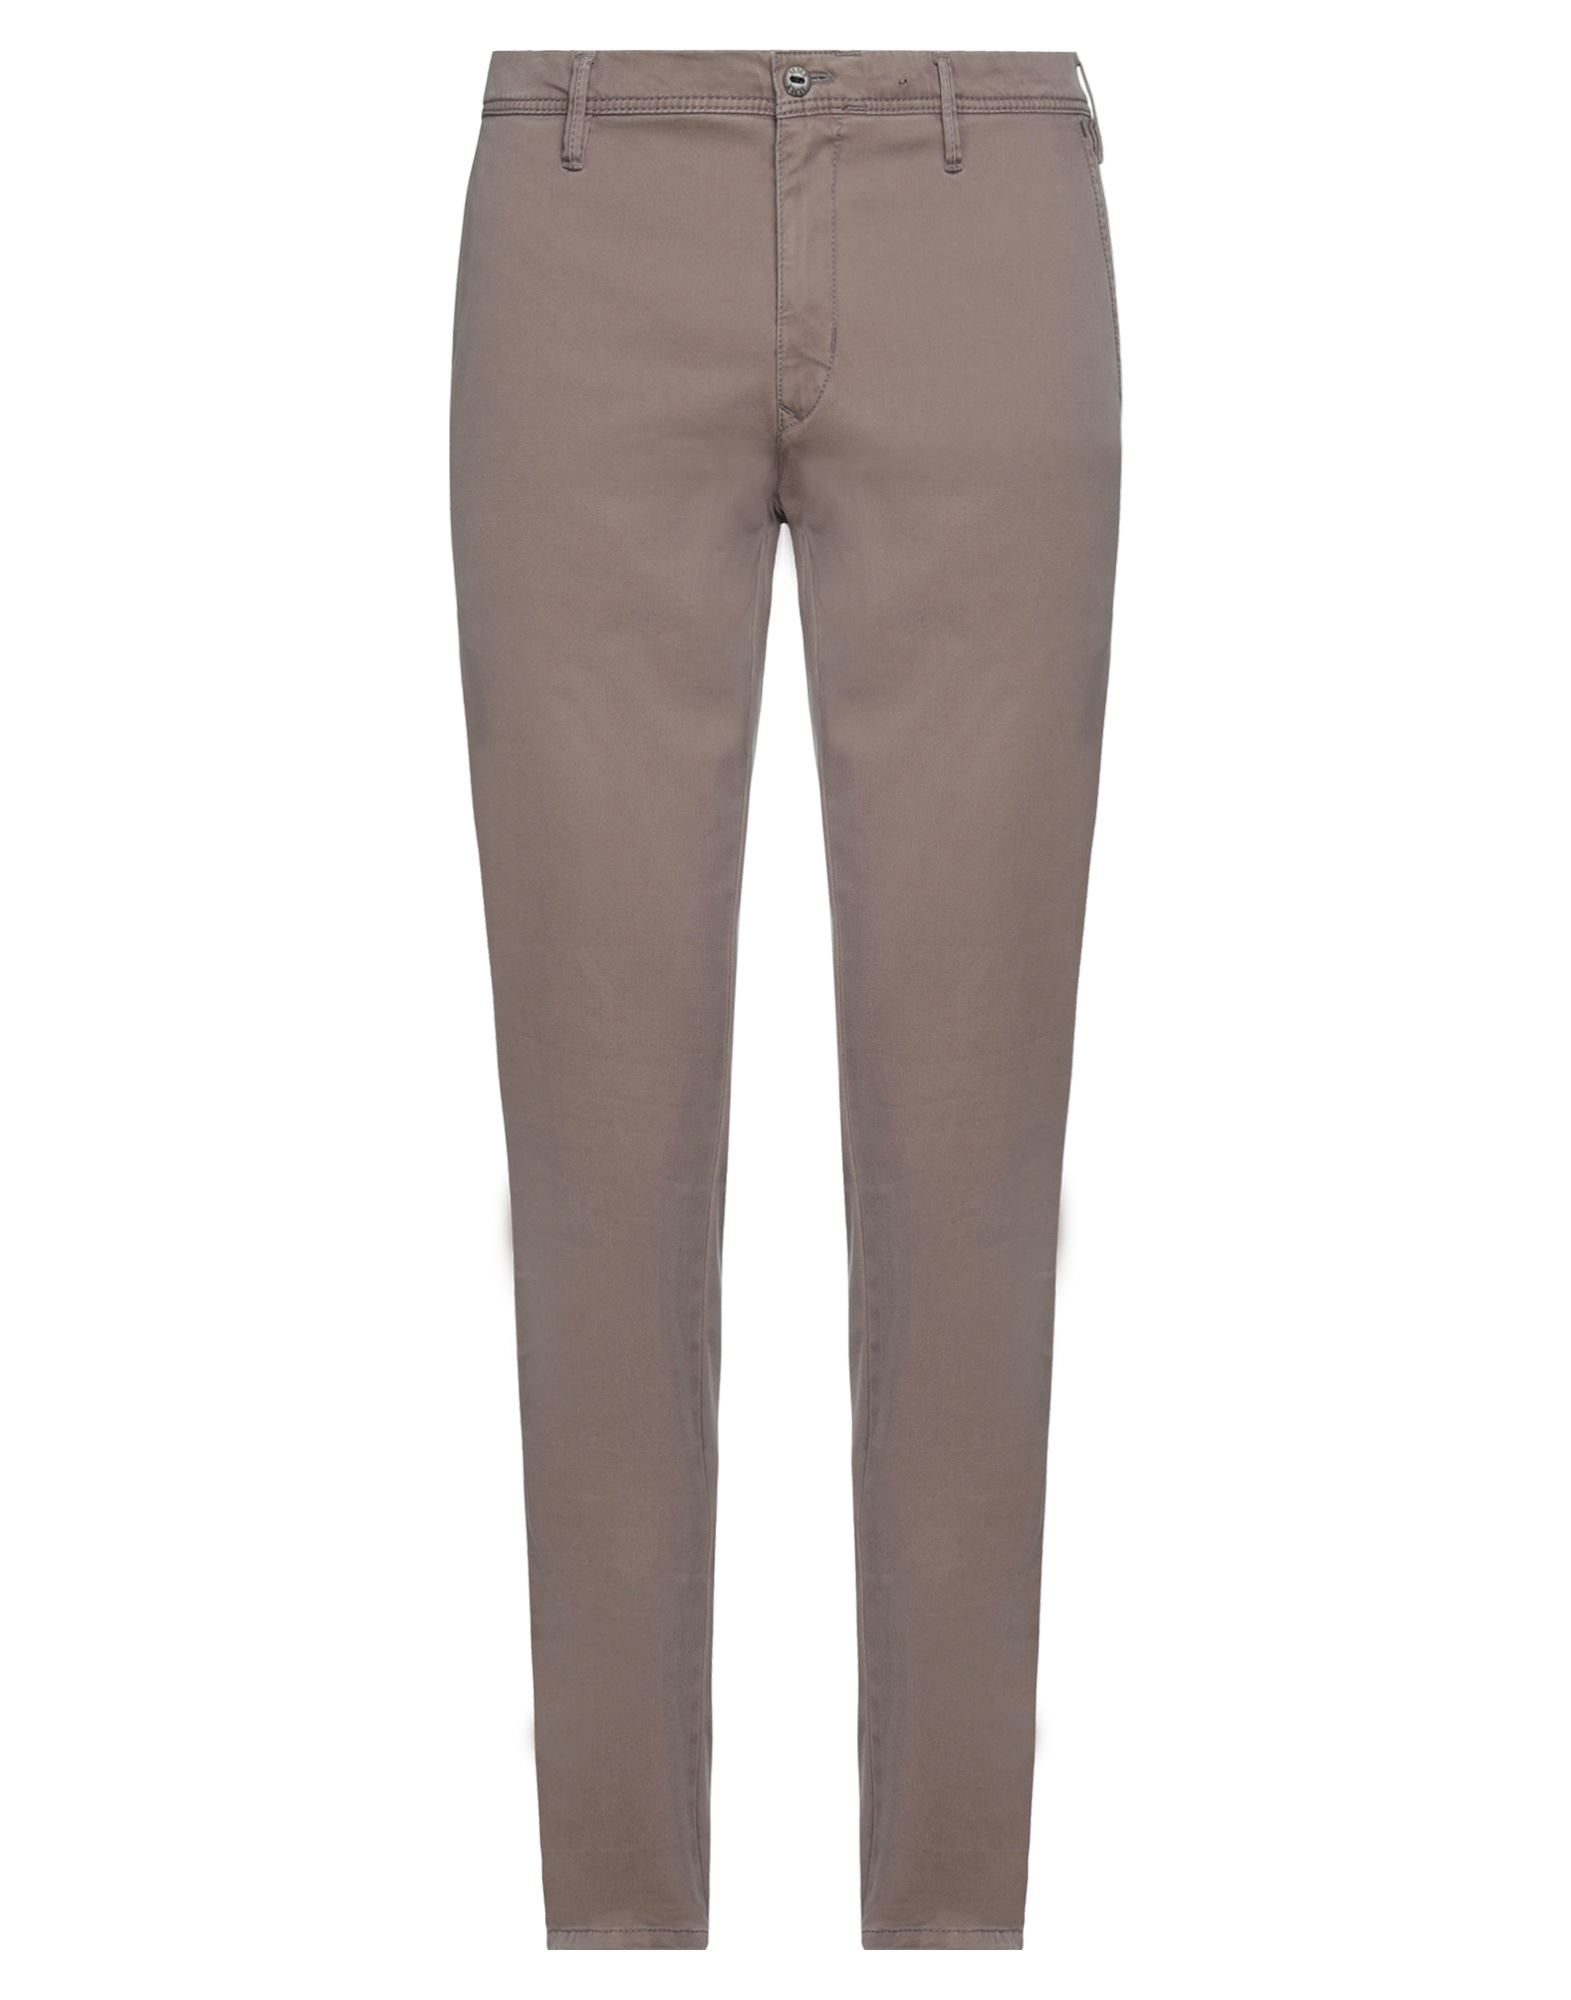 Mmx Pants In Light Brown